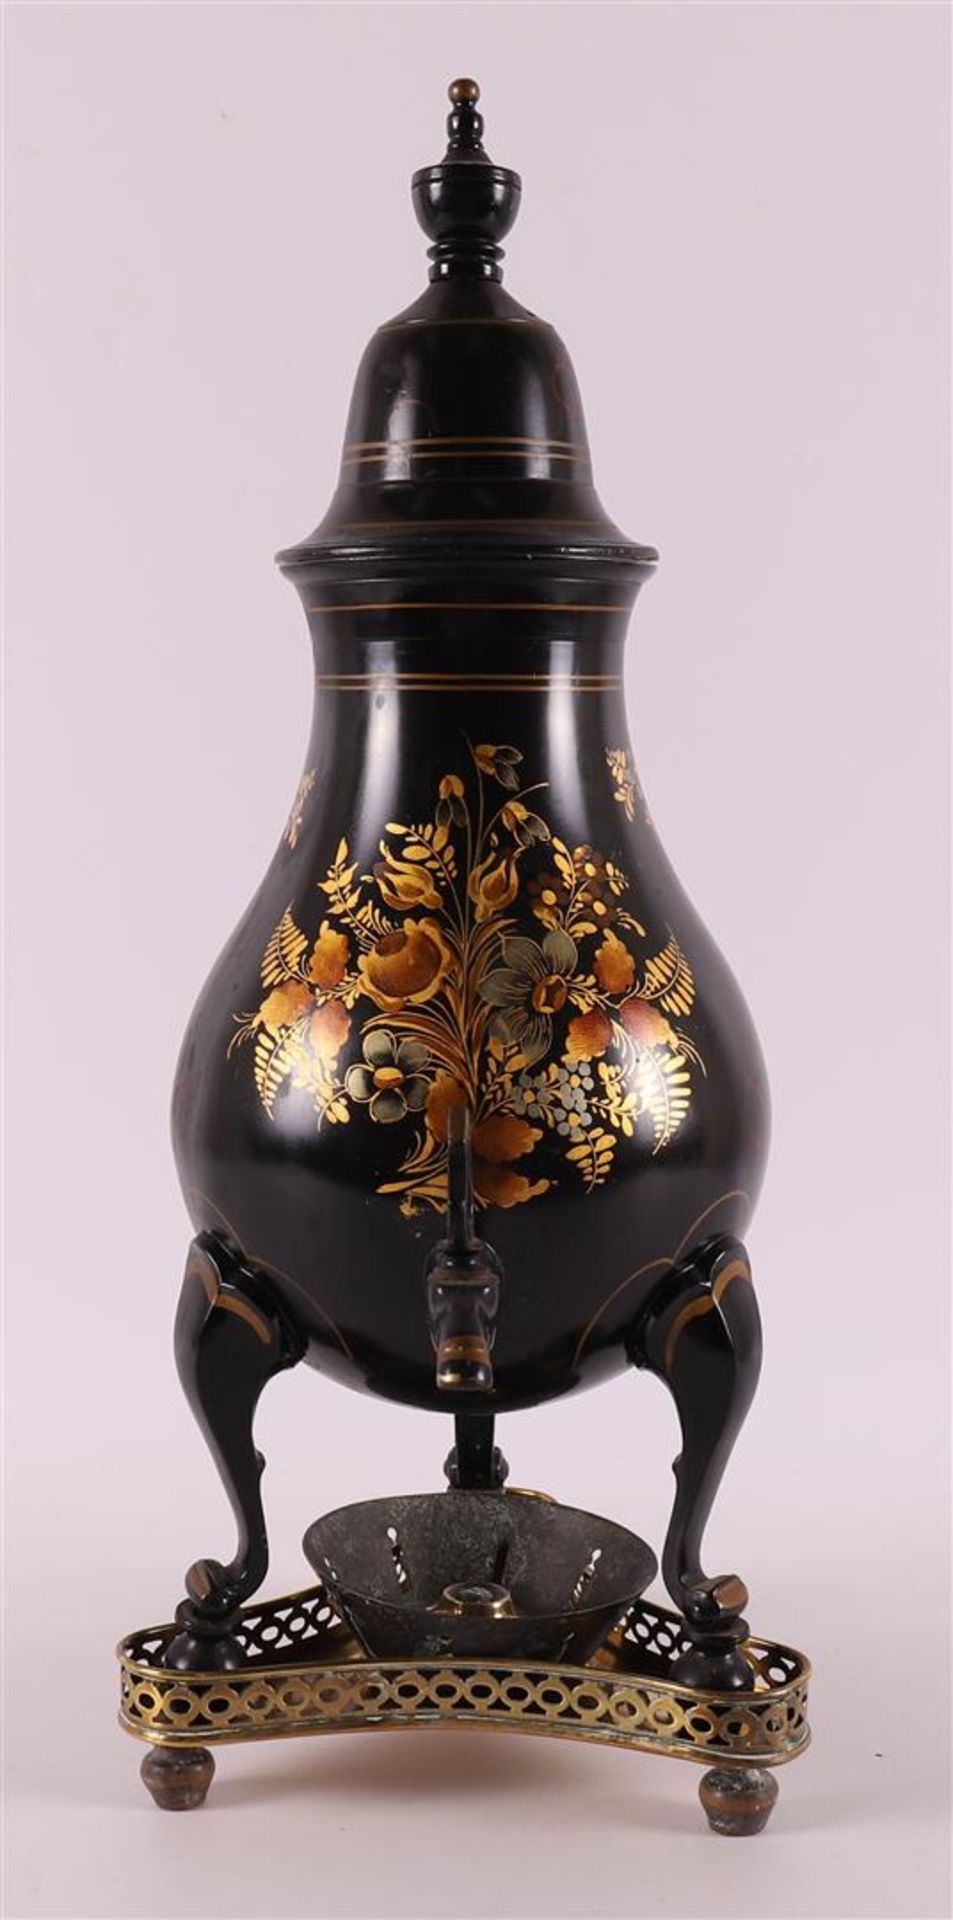 A pear-shaped black lacquered pewter tap jug, second half of the 19th century. - Image 2 of 2